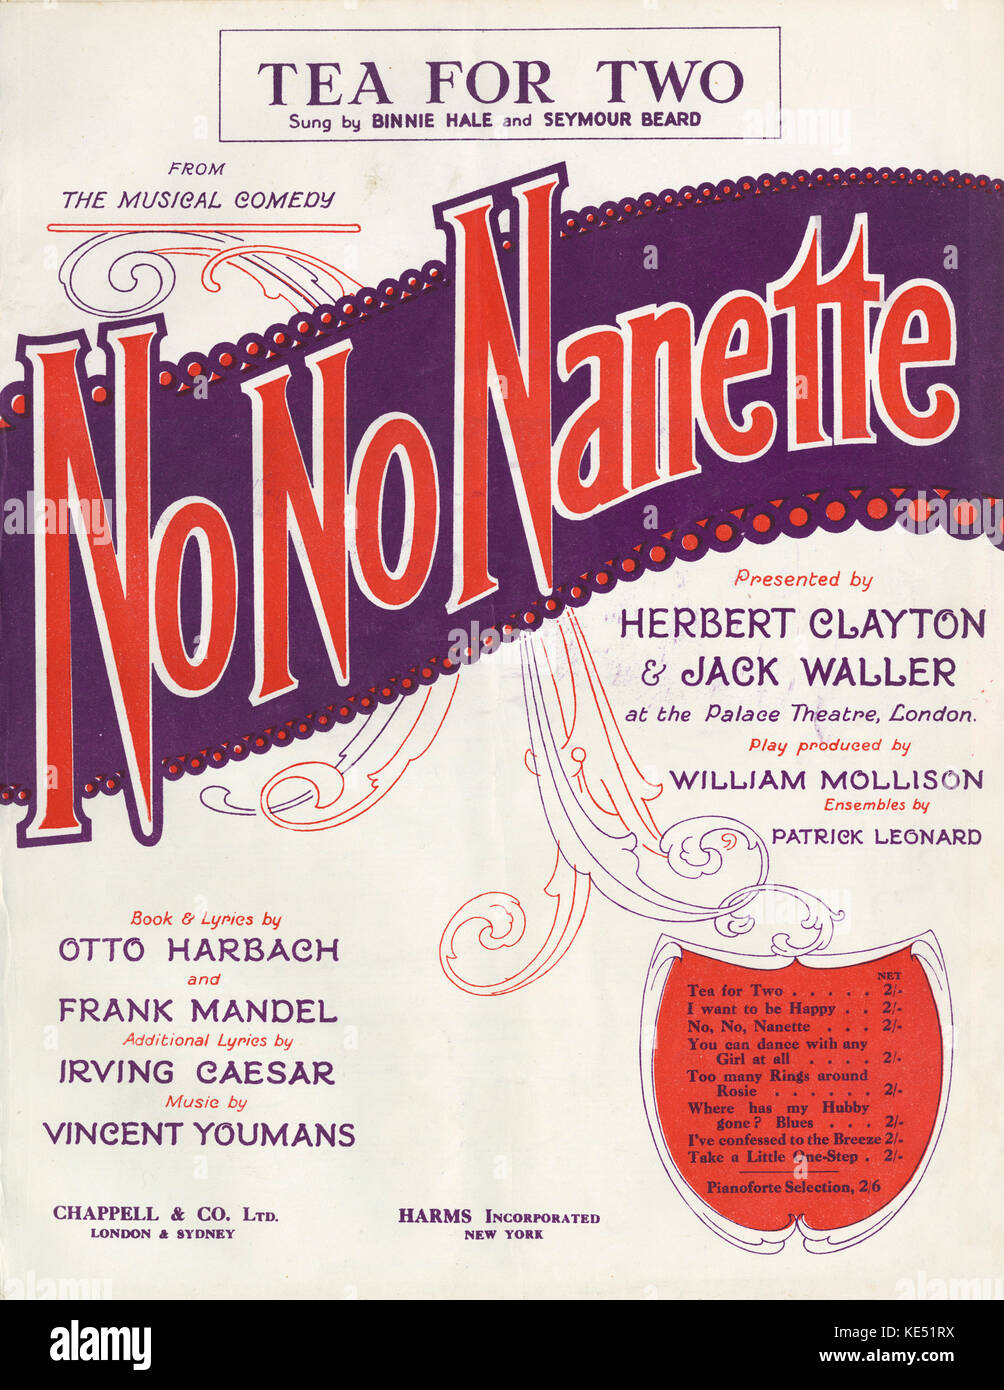 'Tea For Two' - song from the American musical comedy 'No No Nanette', music by Vincent Youmans, book and lyrics by Otto Harbach & Frank Mandel. Score cover. Published: London, Chappell & Co., 1924. Stock Photo